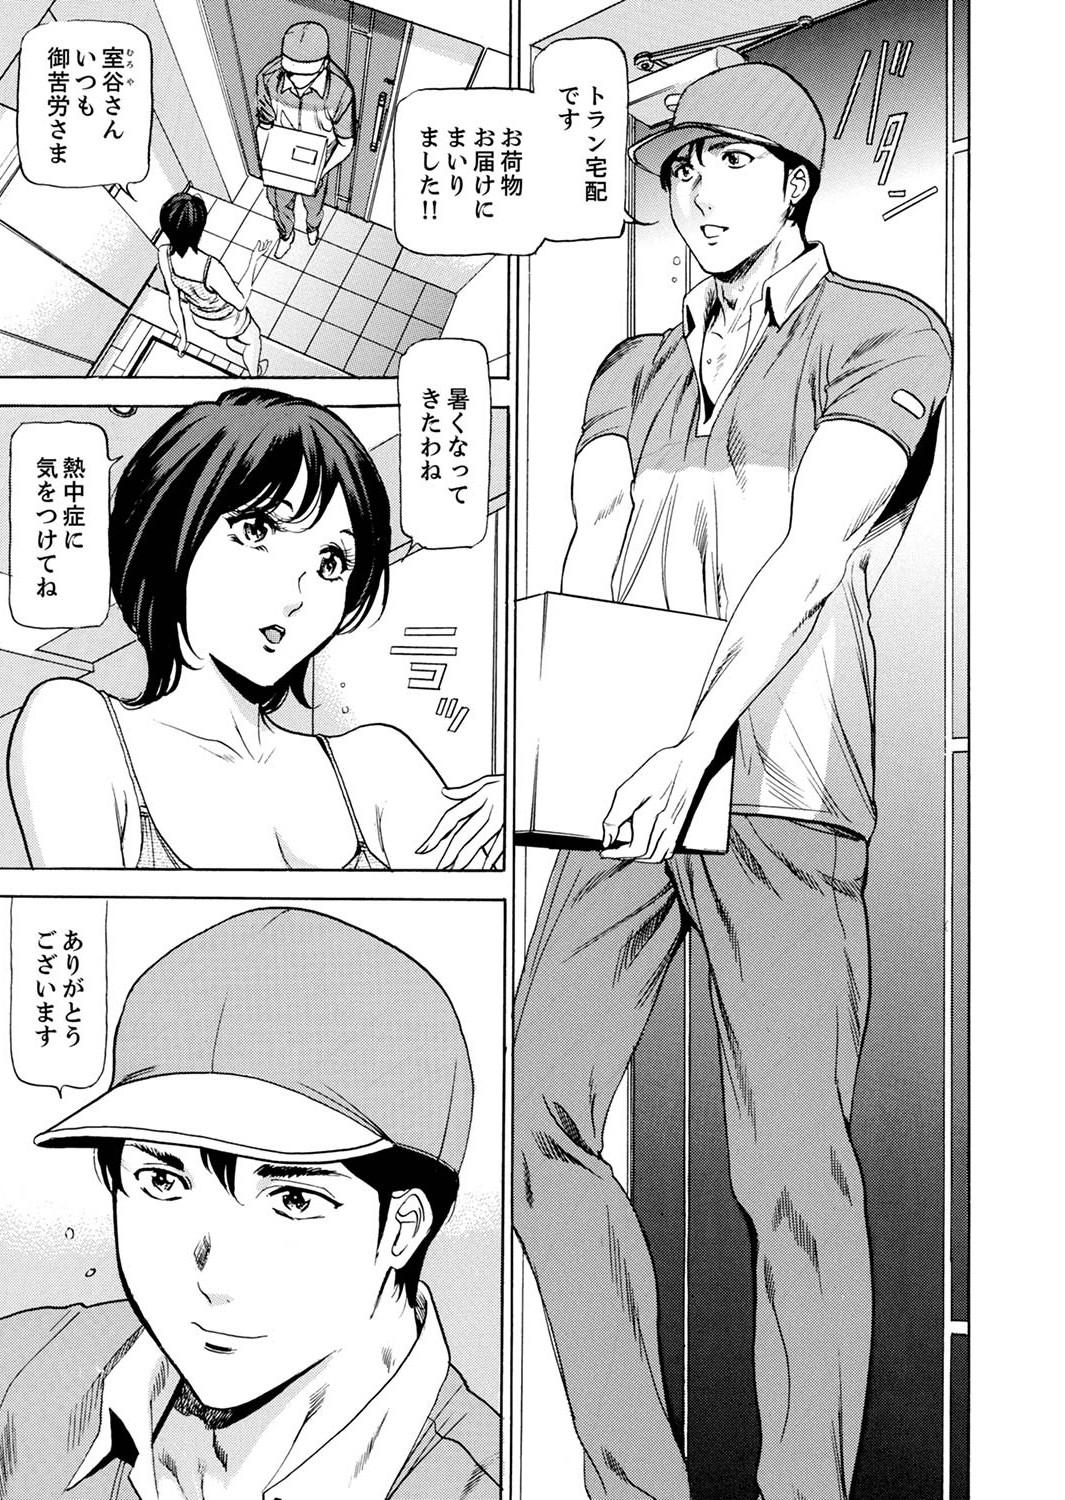 Athletic 玄関先からはじまる不倫～配達員のセックスは手加減なし！【合本版】 1 Cheating Wife - Page 7